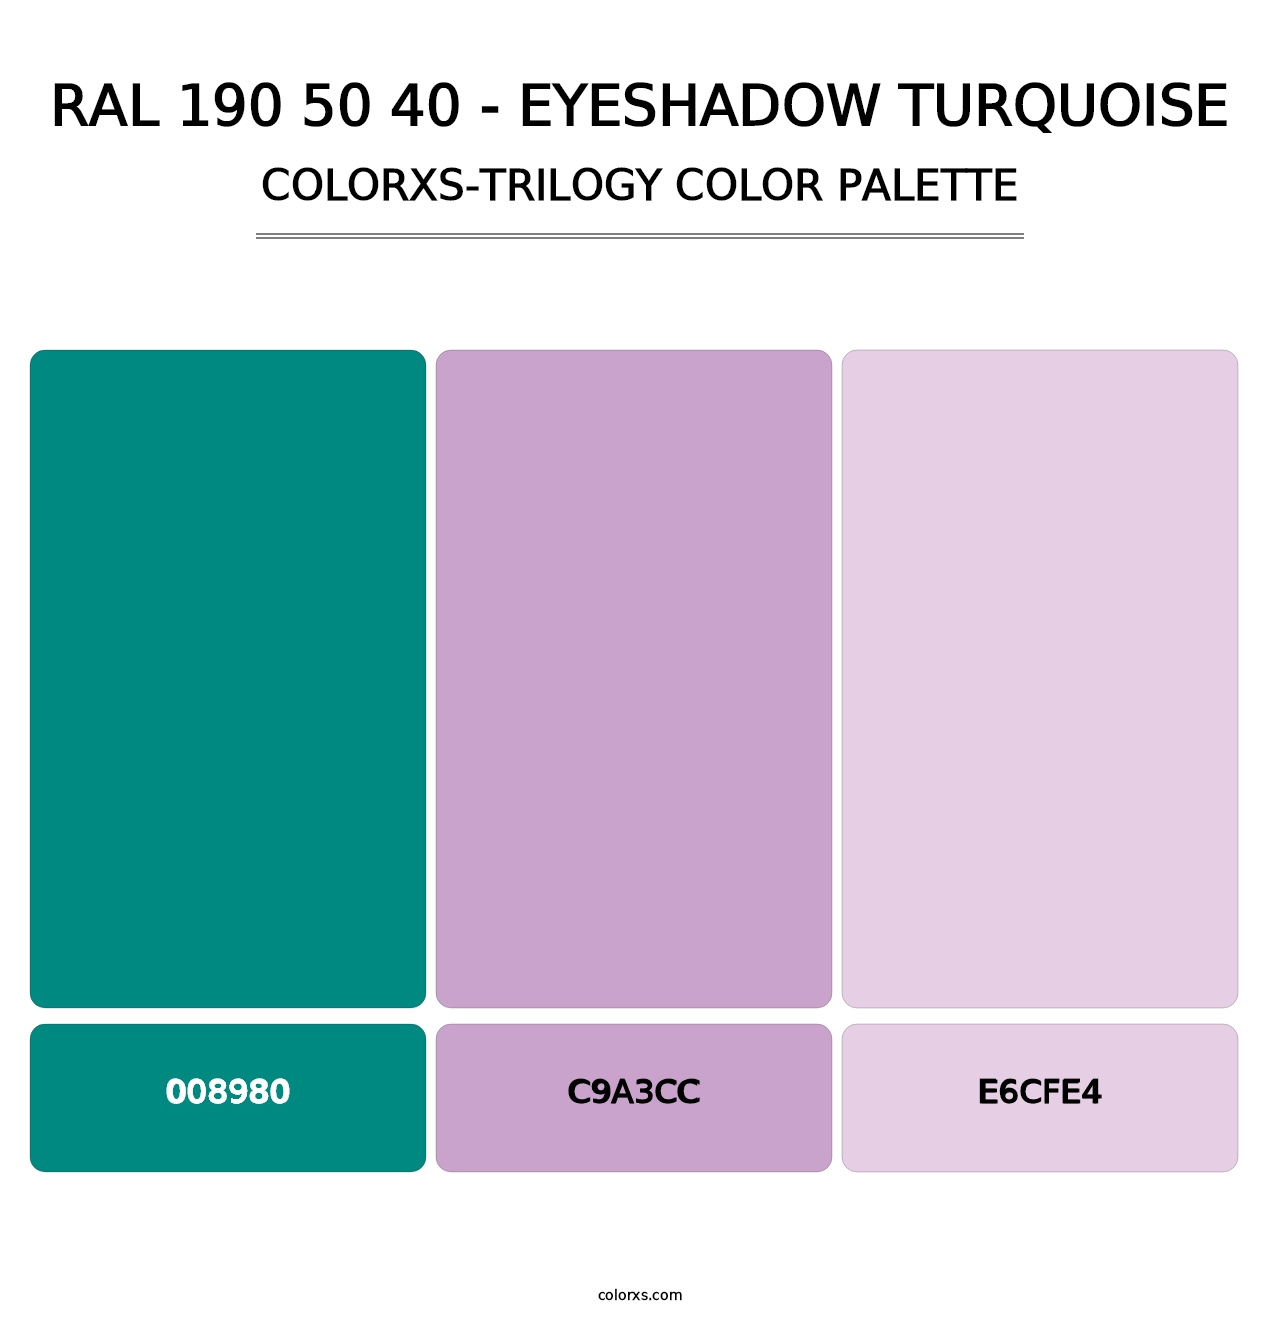 RAL 190 50 40 - Eyeshadow Turquoise - Colorxs Trilogy Palette